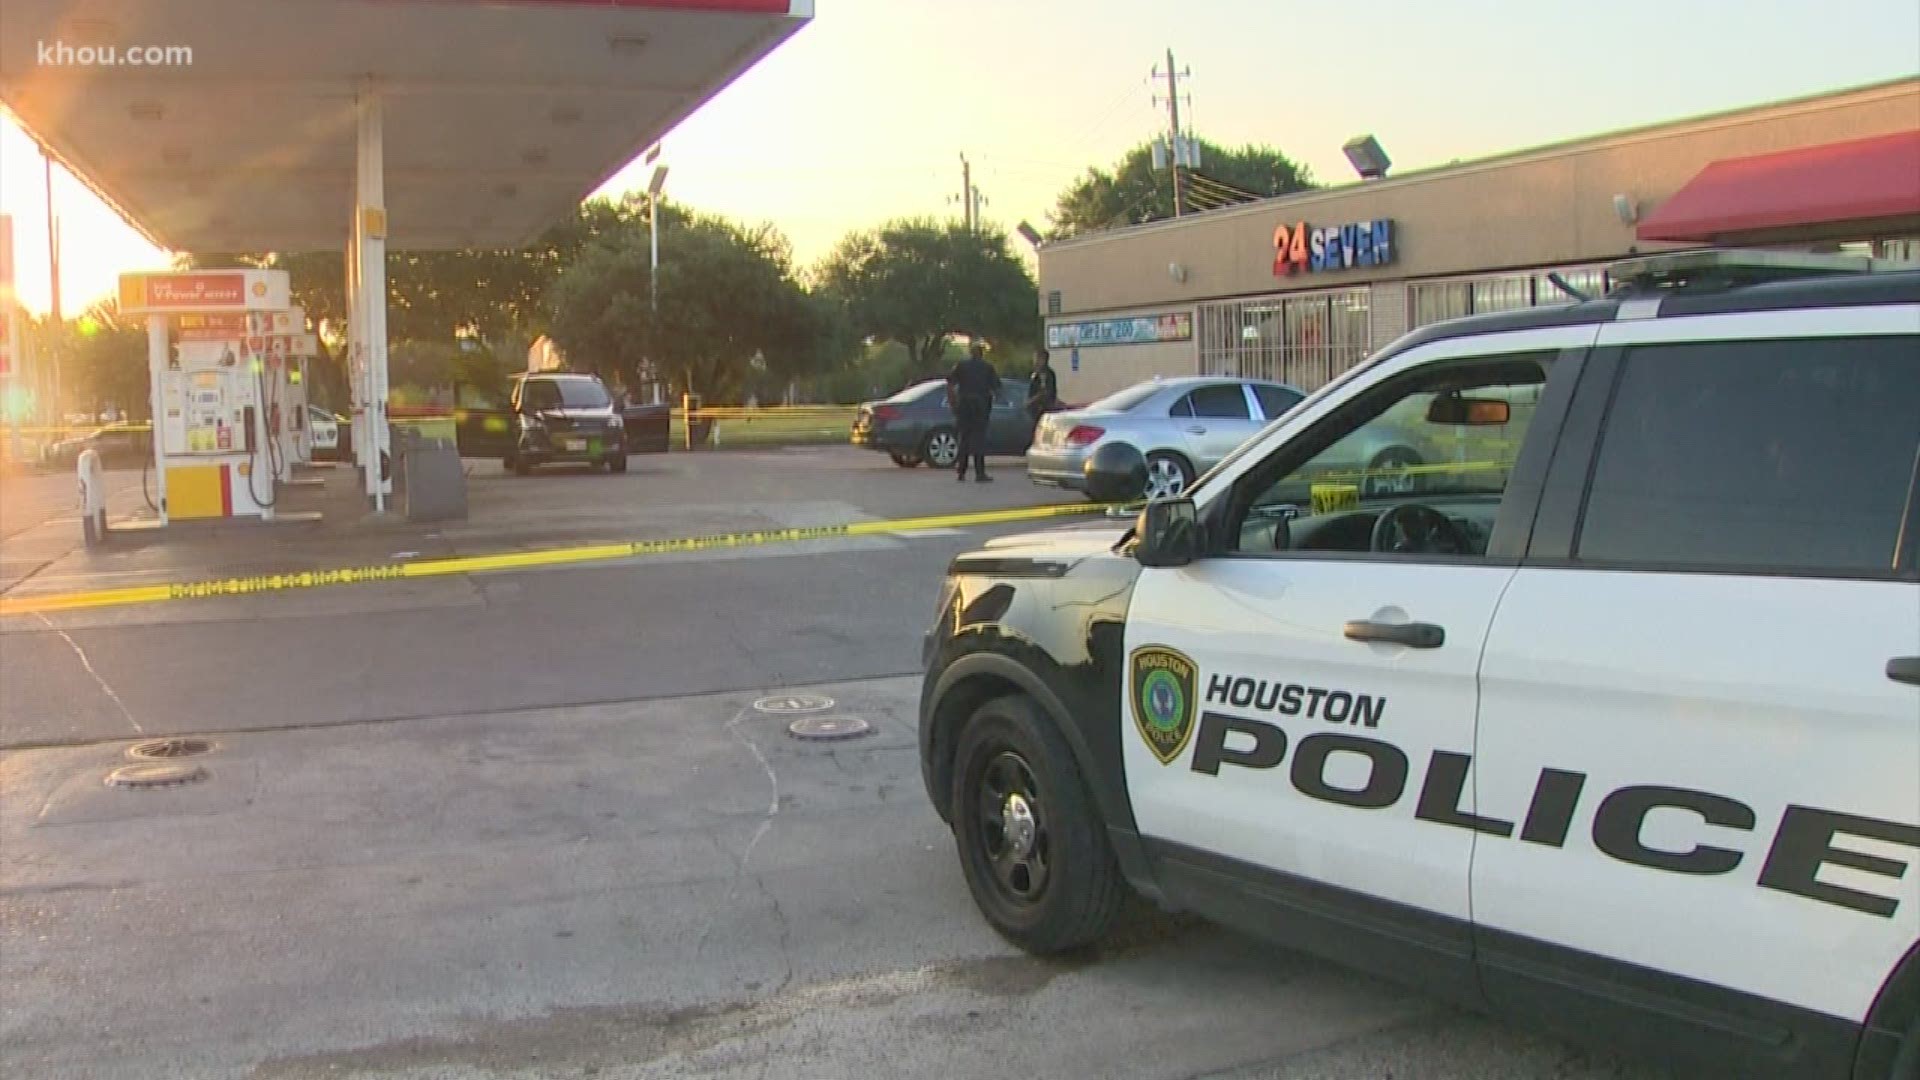 Police responded to a gas station in southwest Houston where someone in a vehicle was reportedly shot and killed, Houston police confirm.